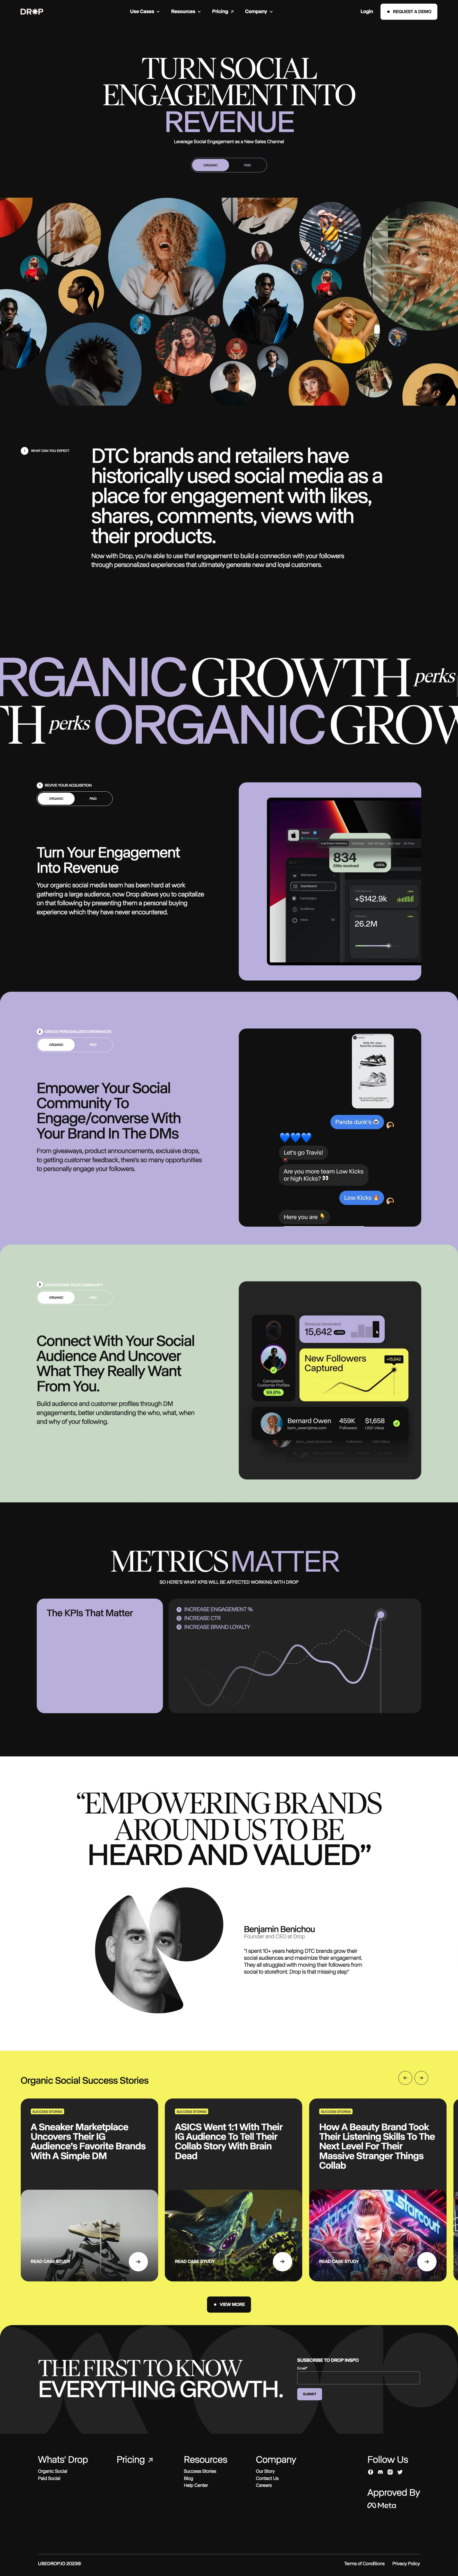 Drop Landing Page Example: We revolutionize social commerce by enabling brands and retailers to sell directly through Instagram Direct Messages. With our platform, businesses can easily capture their audience on social media, boost conversion rates, and turn followers into life-long customers.